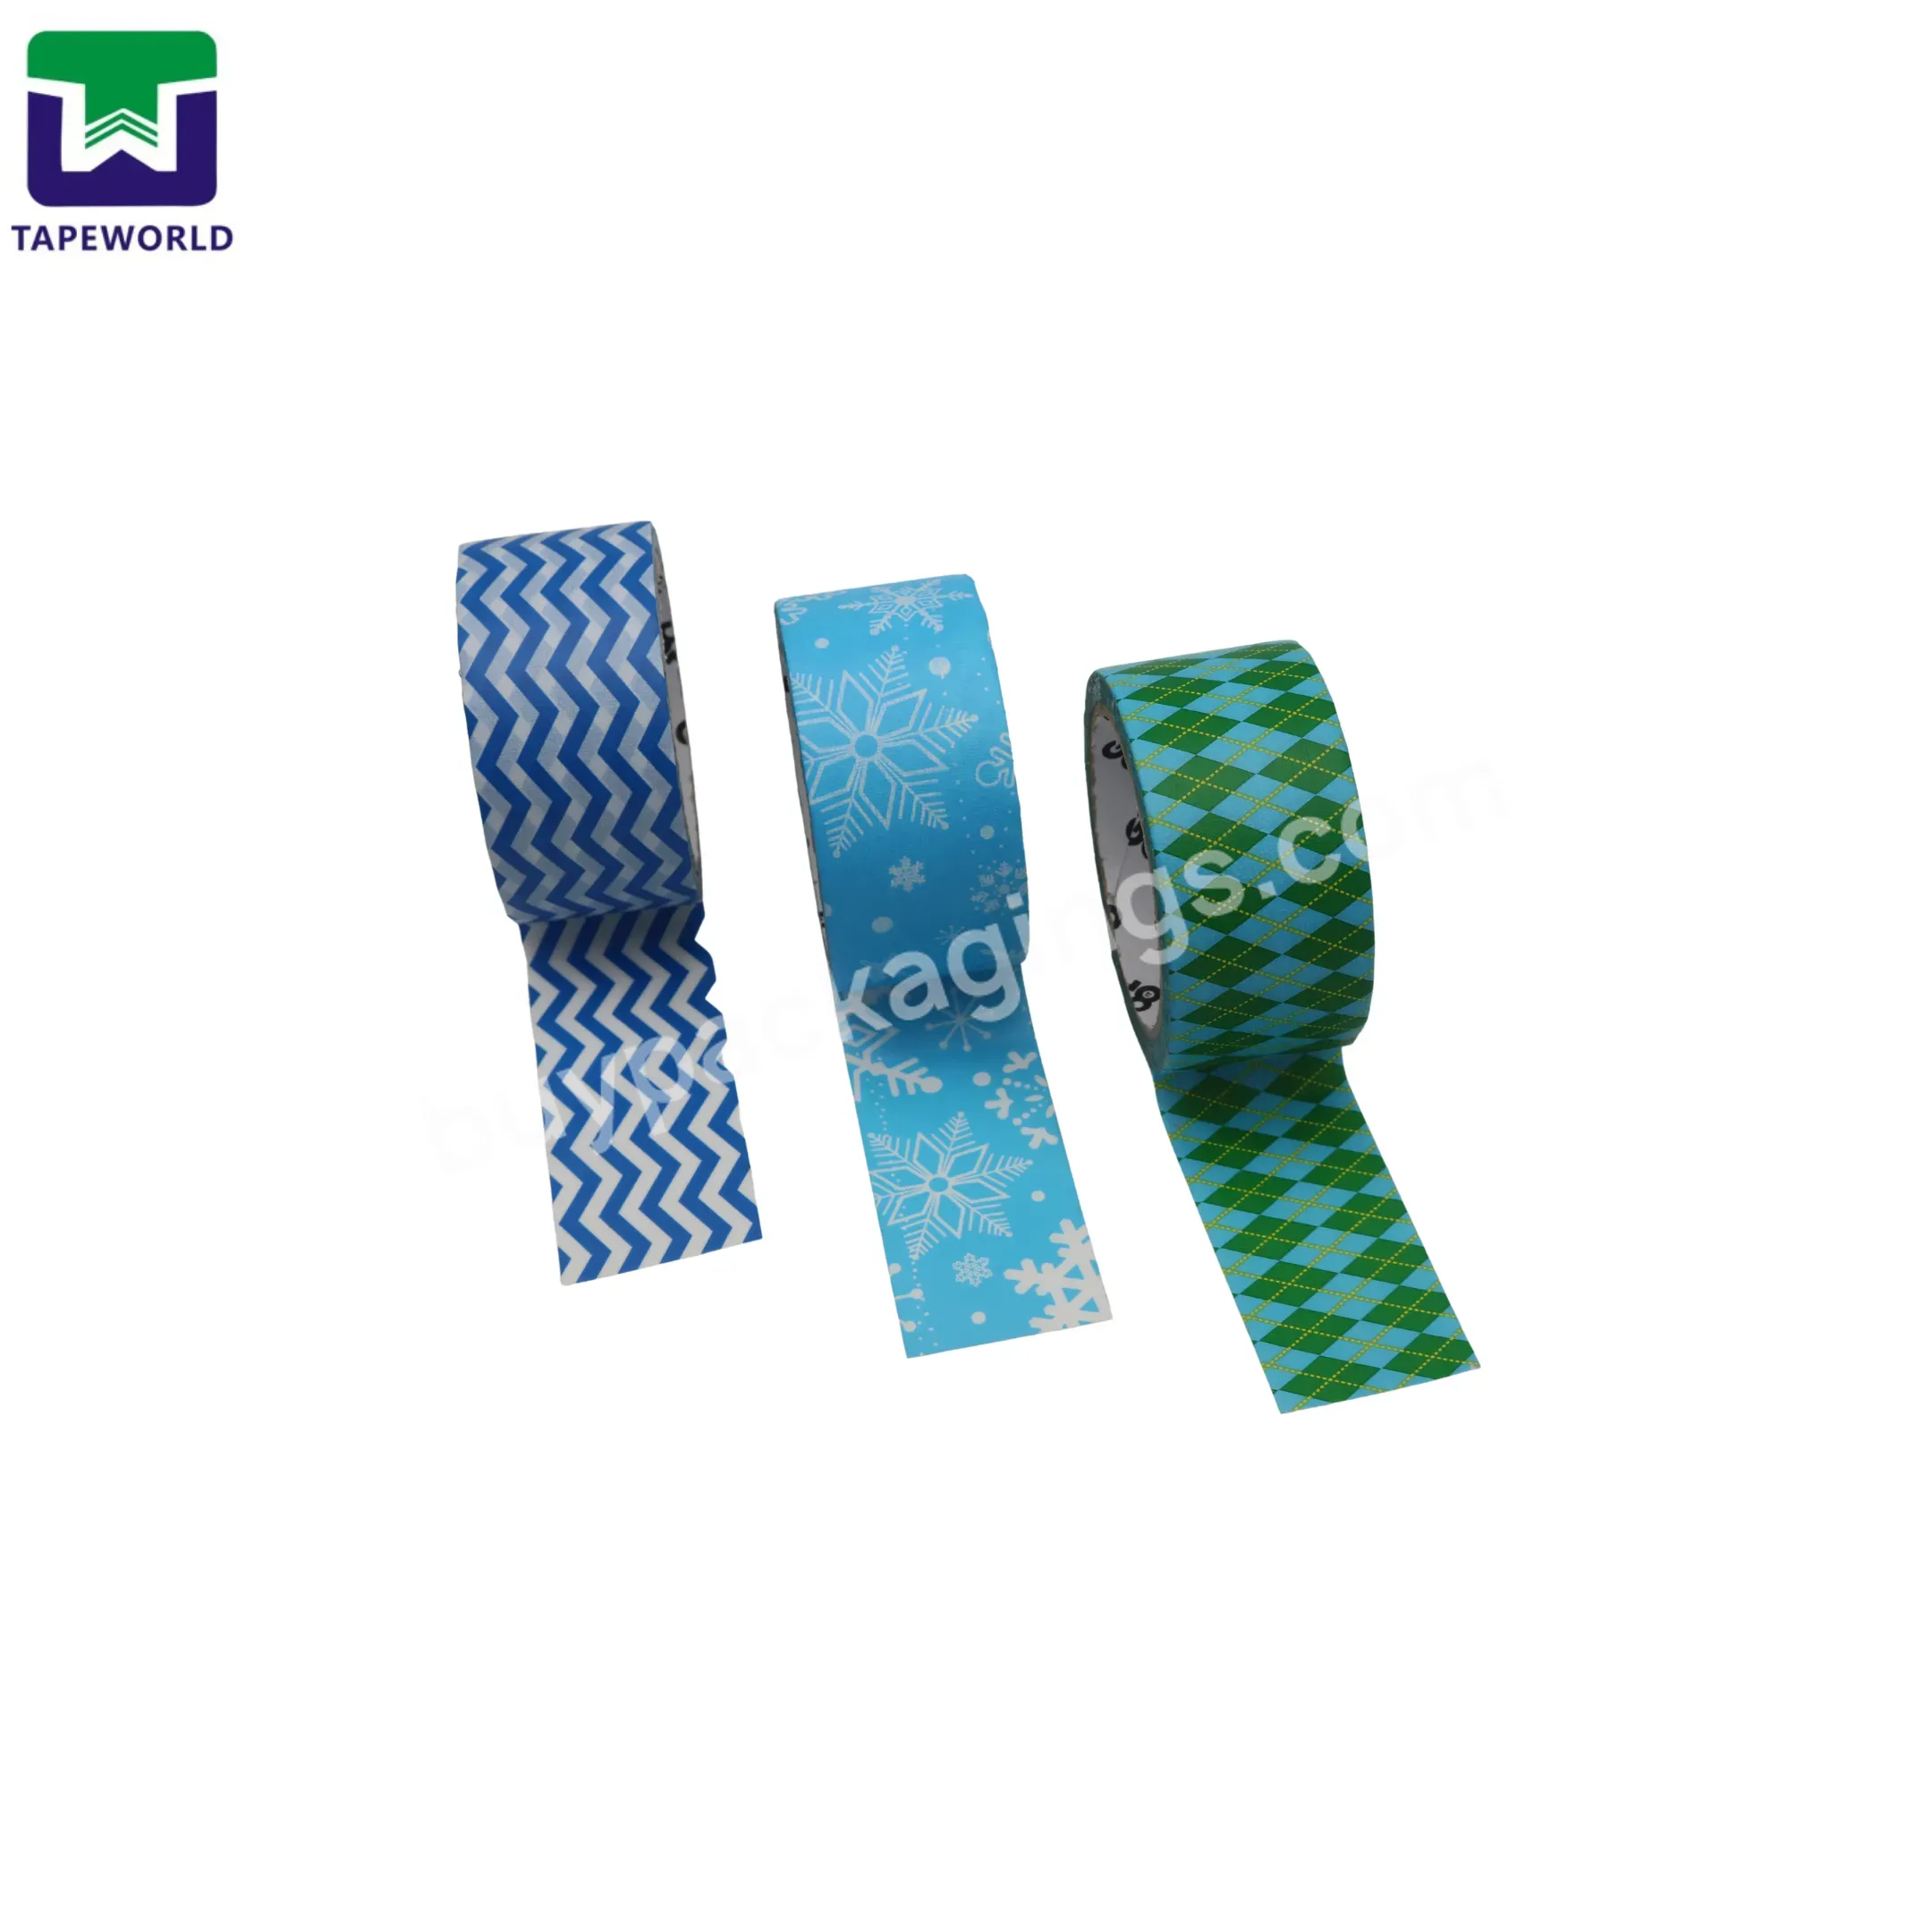 Factory Direct Hot Sale Adhesive Tape Branded Prime Patterned Colored Custom Printed Duct Cloth Tape - Buy Hot Sale Branded Prime Tape,Custom Design Duct Tape,Custom Printed Adhesive Tape.